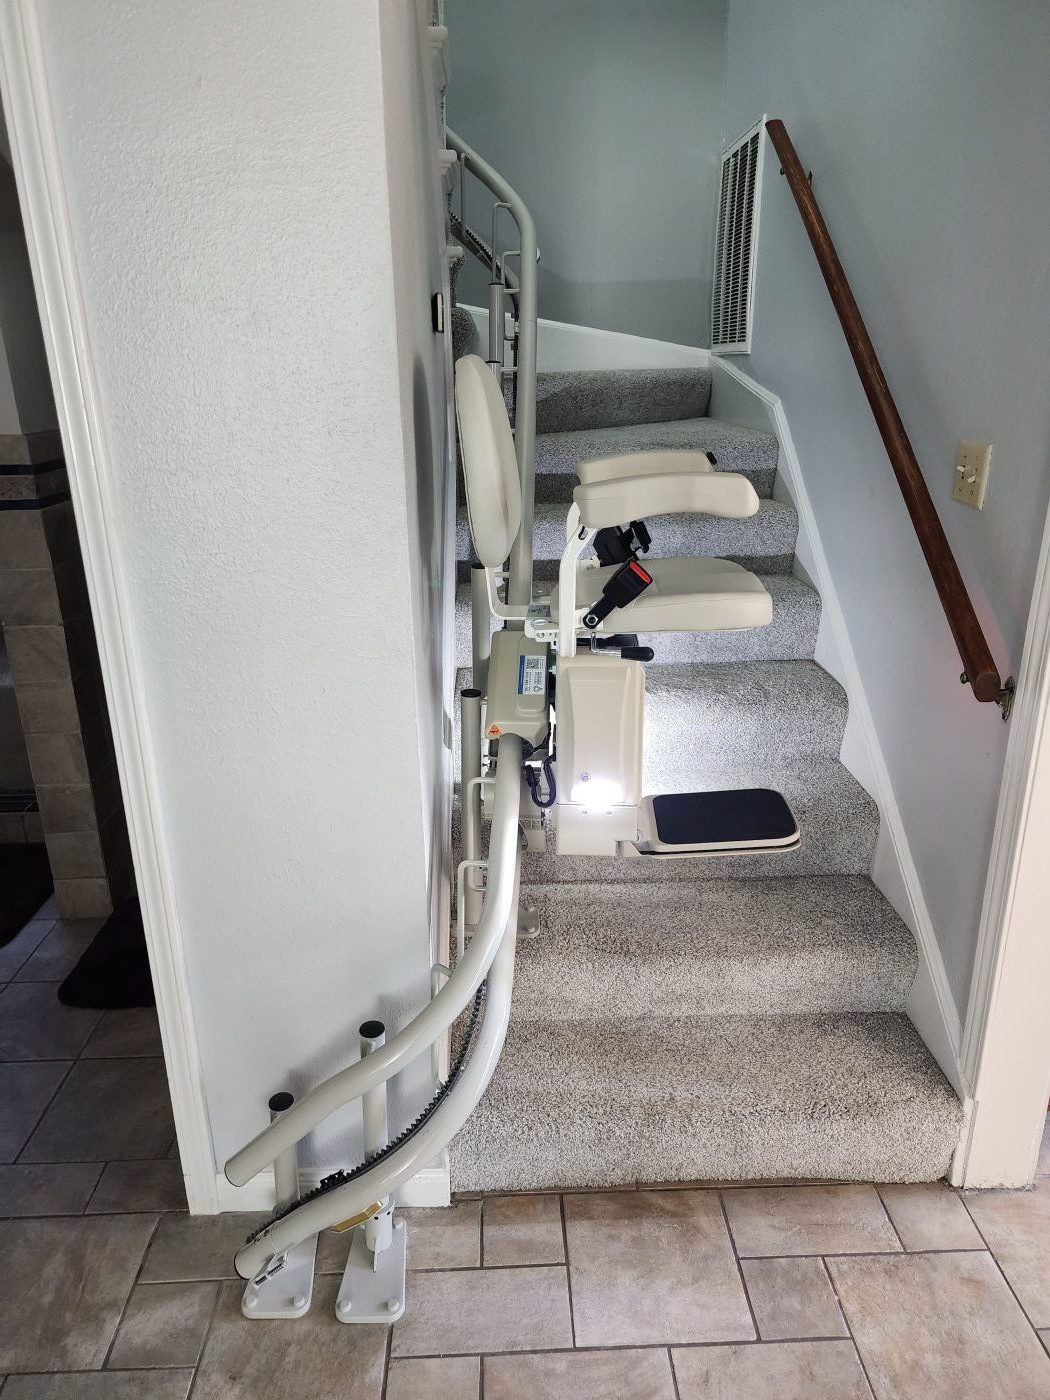 Curved Stairlifts: Featuring the Pilot Navigtor E604 Curved Stairlift.